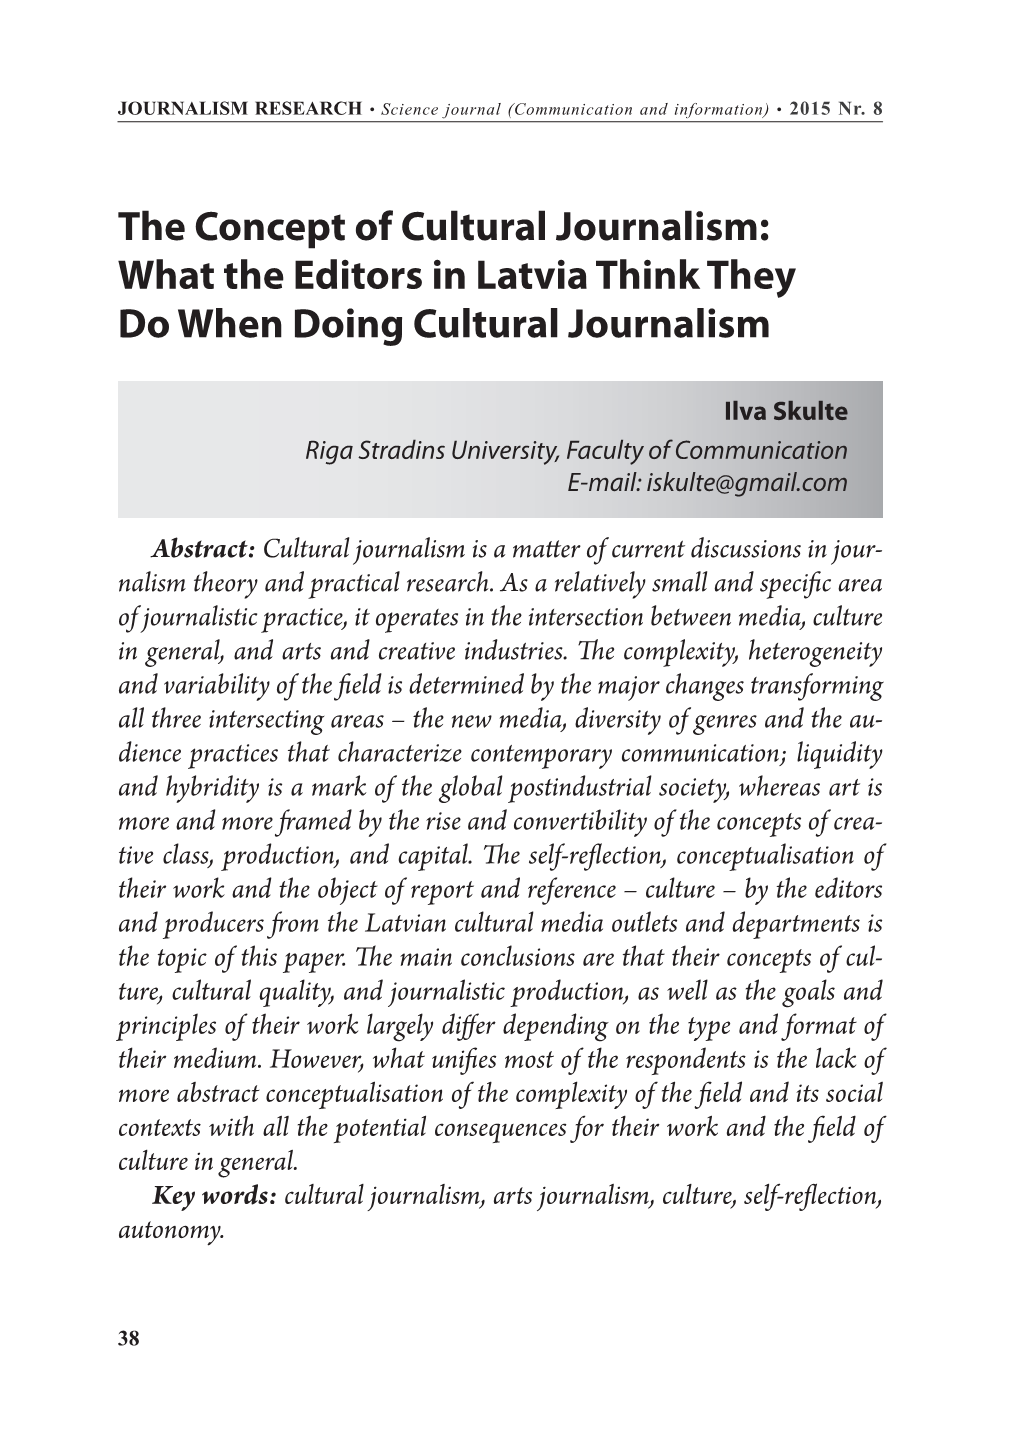 The Concept of Cultural Journalism: What the Editors in Latvia Think They Do When Doing Cultural Journalism